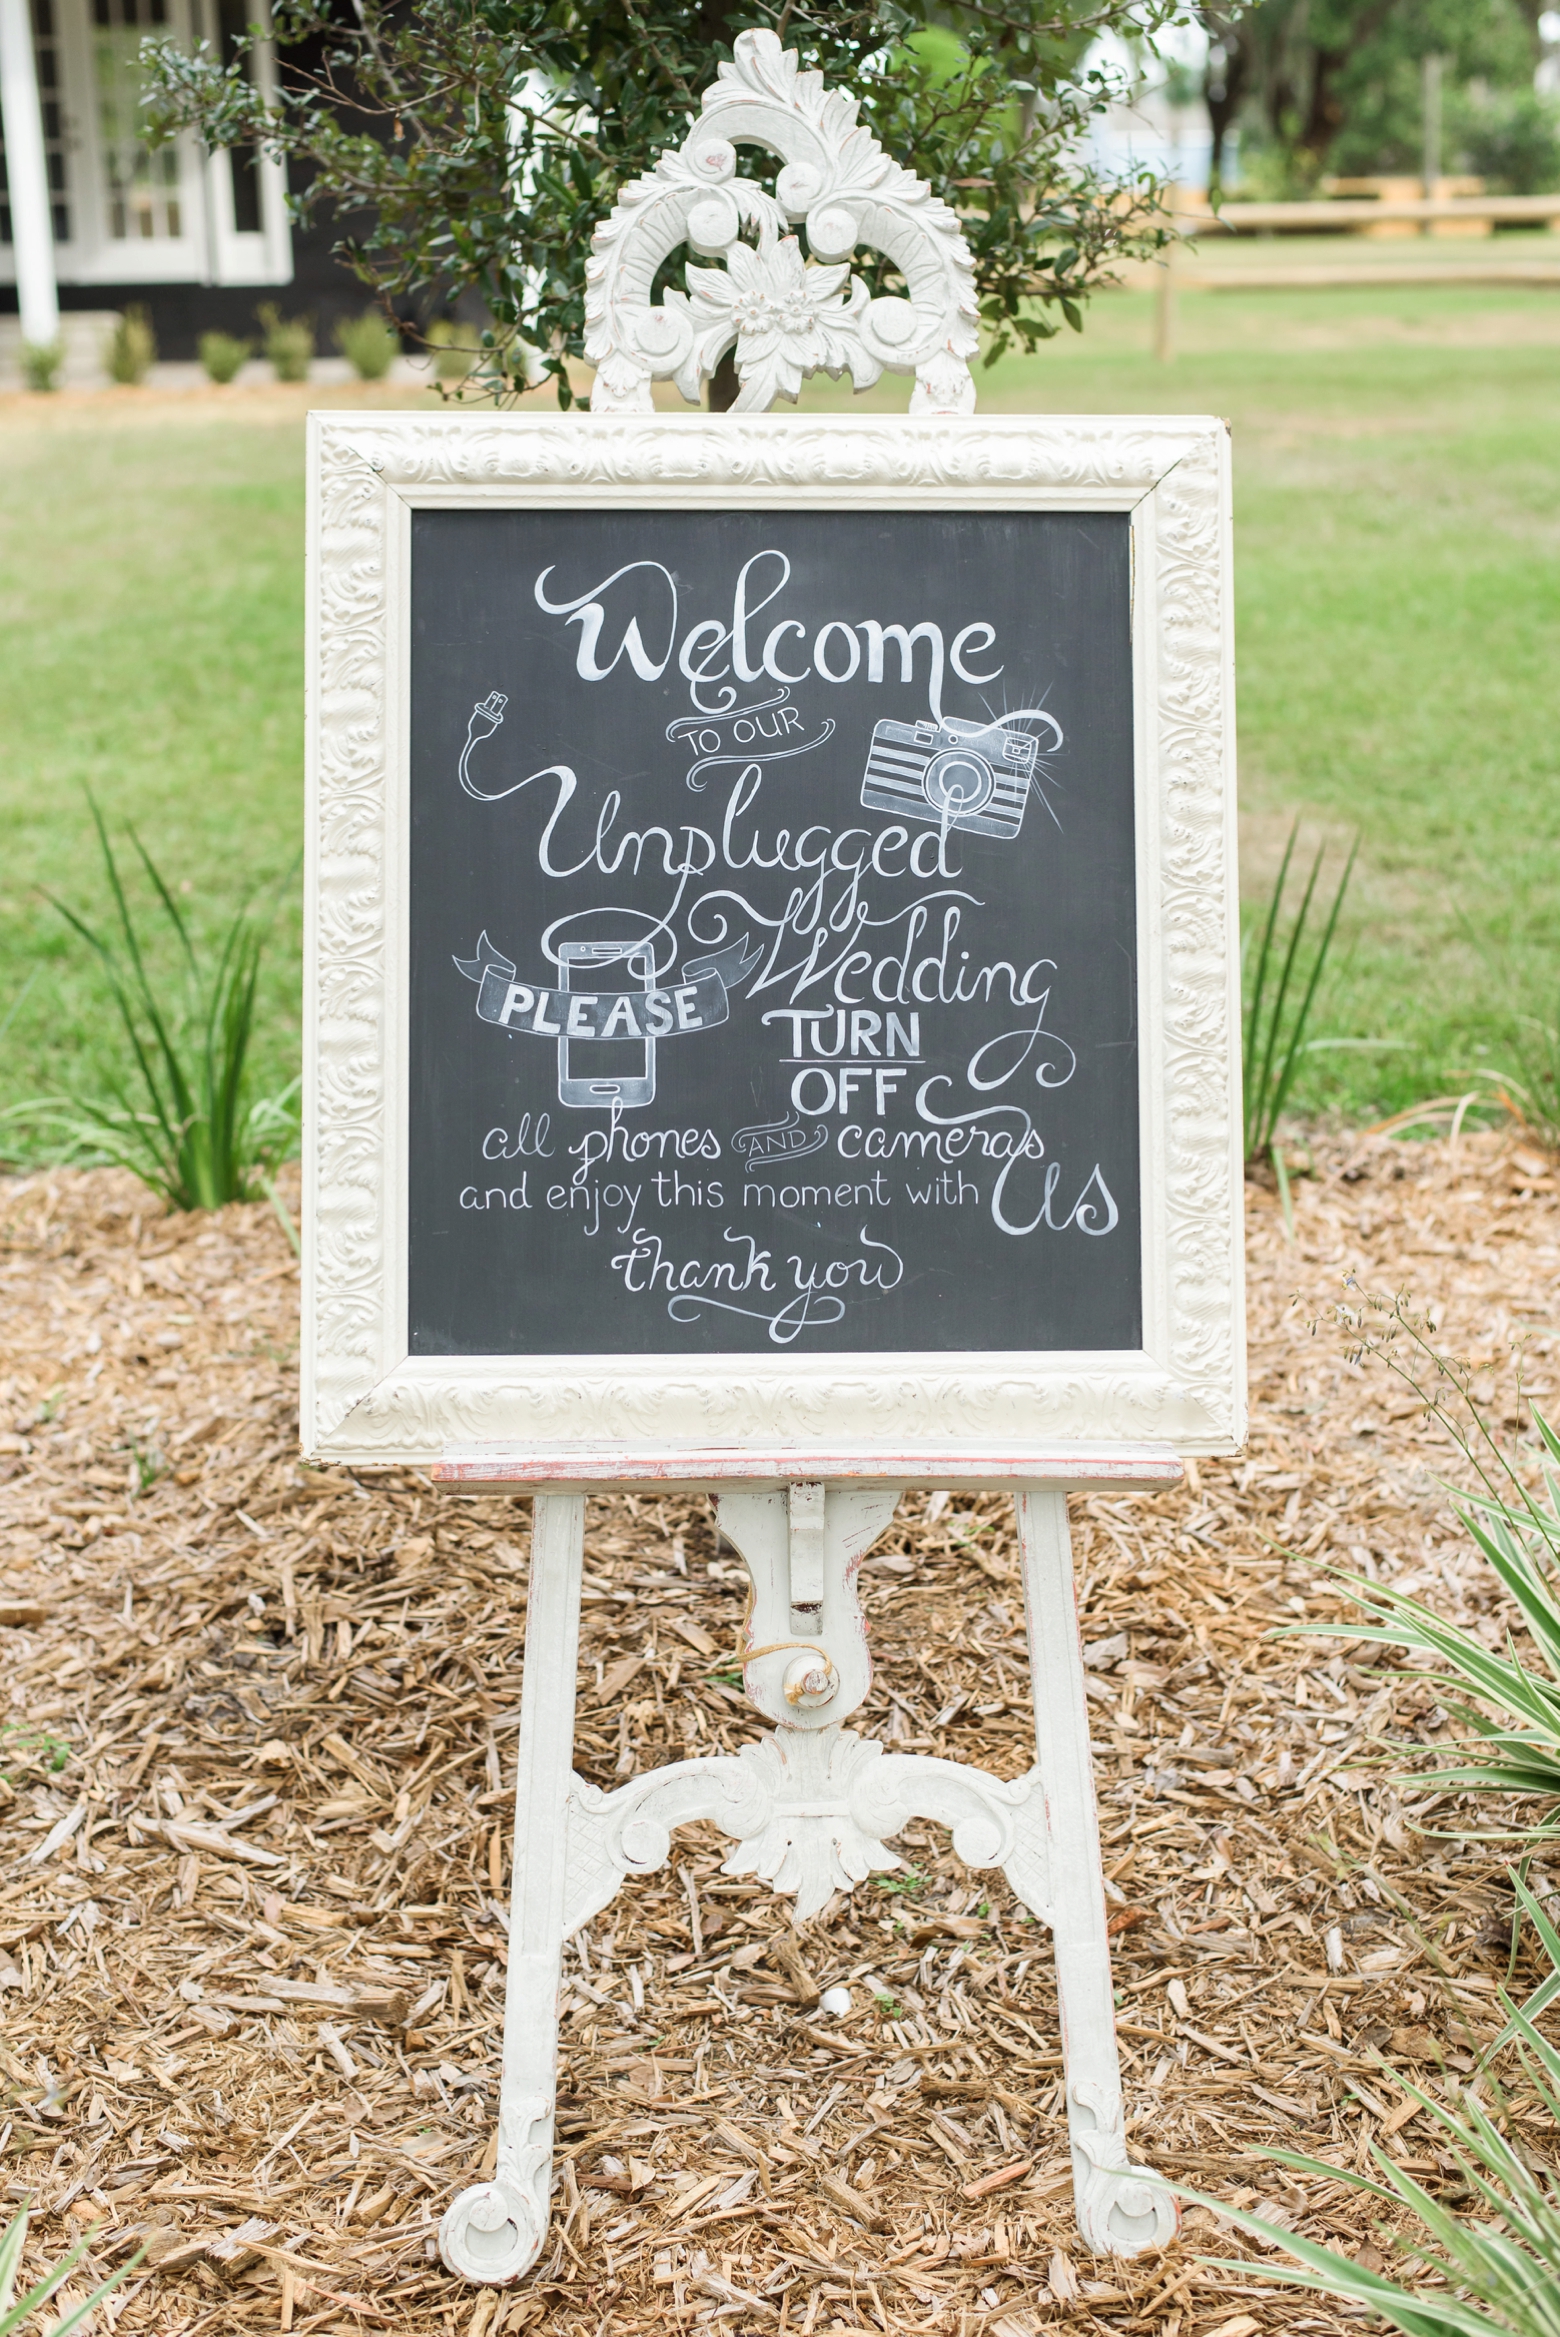 Chalkboard sign outside the cross creek wedding ceremony asking guests to turn off their cell phones